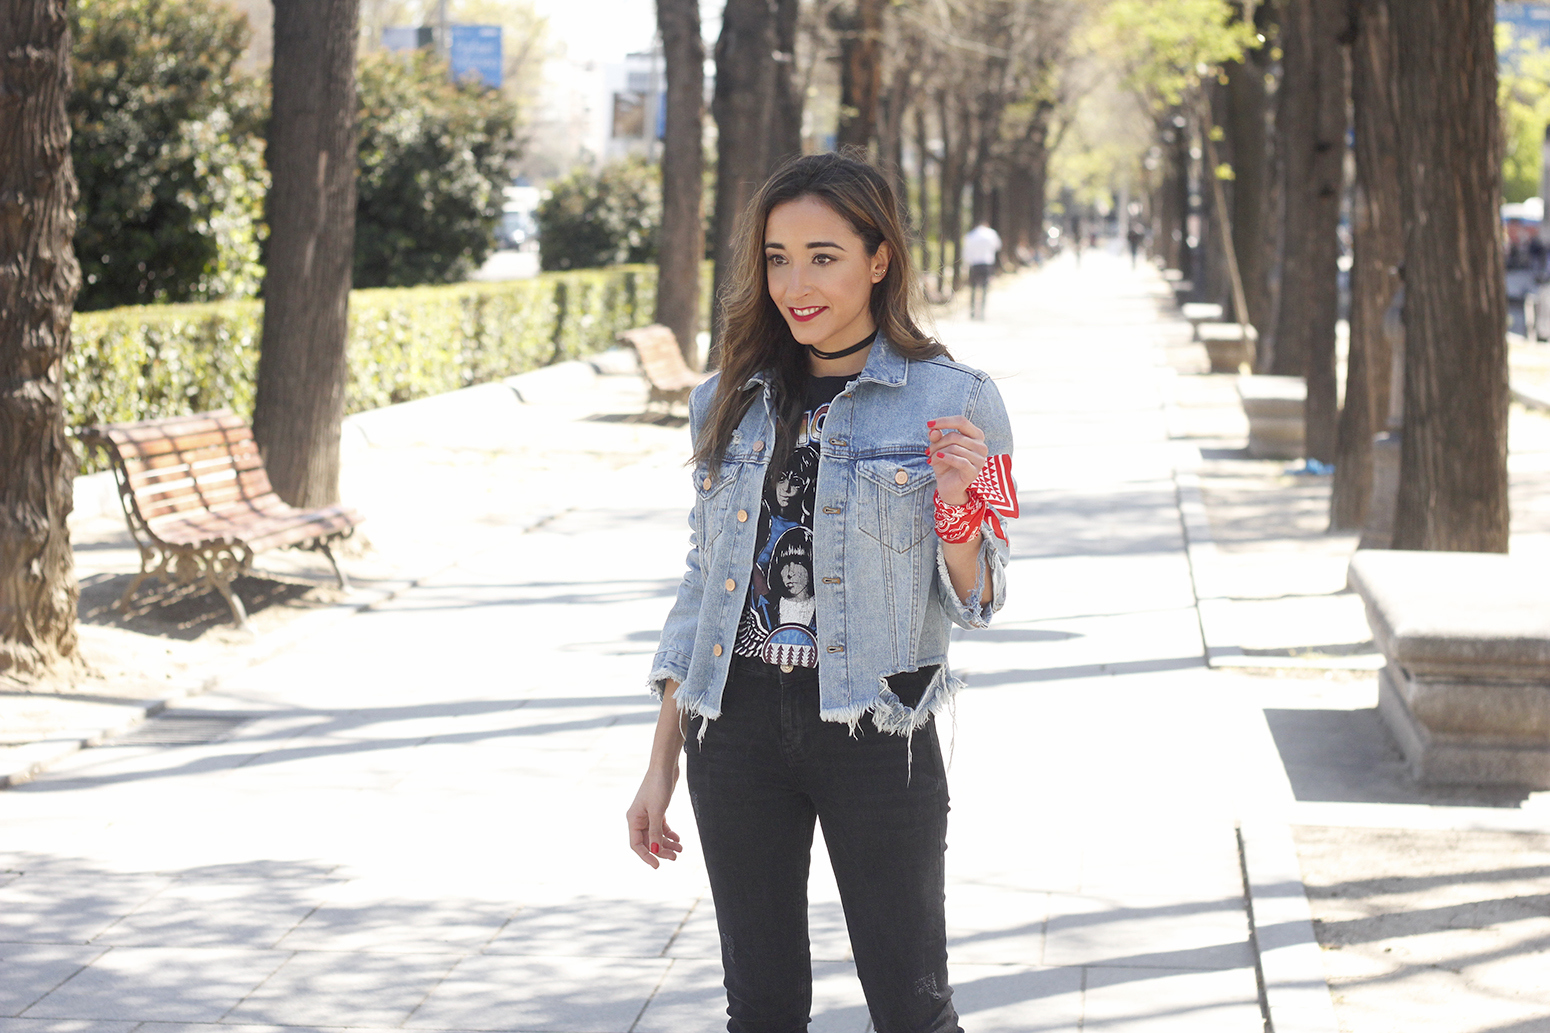 denim jacket and black jeans outfit